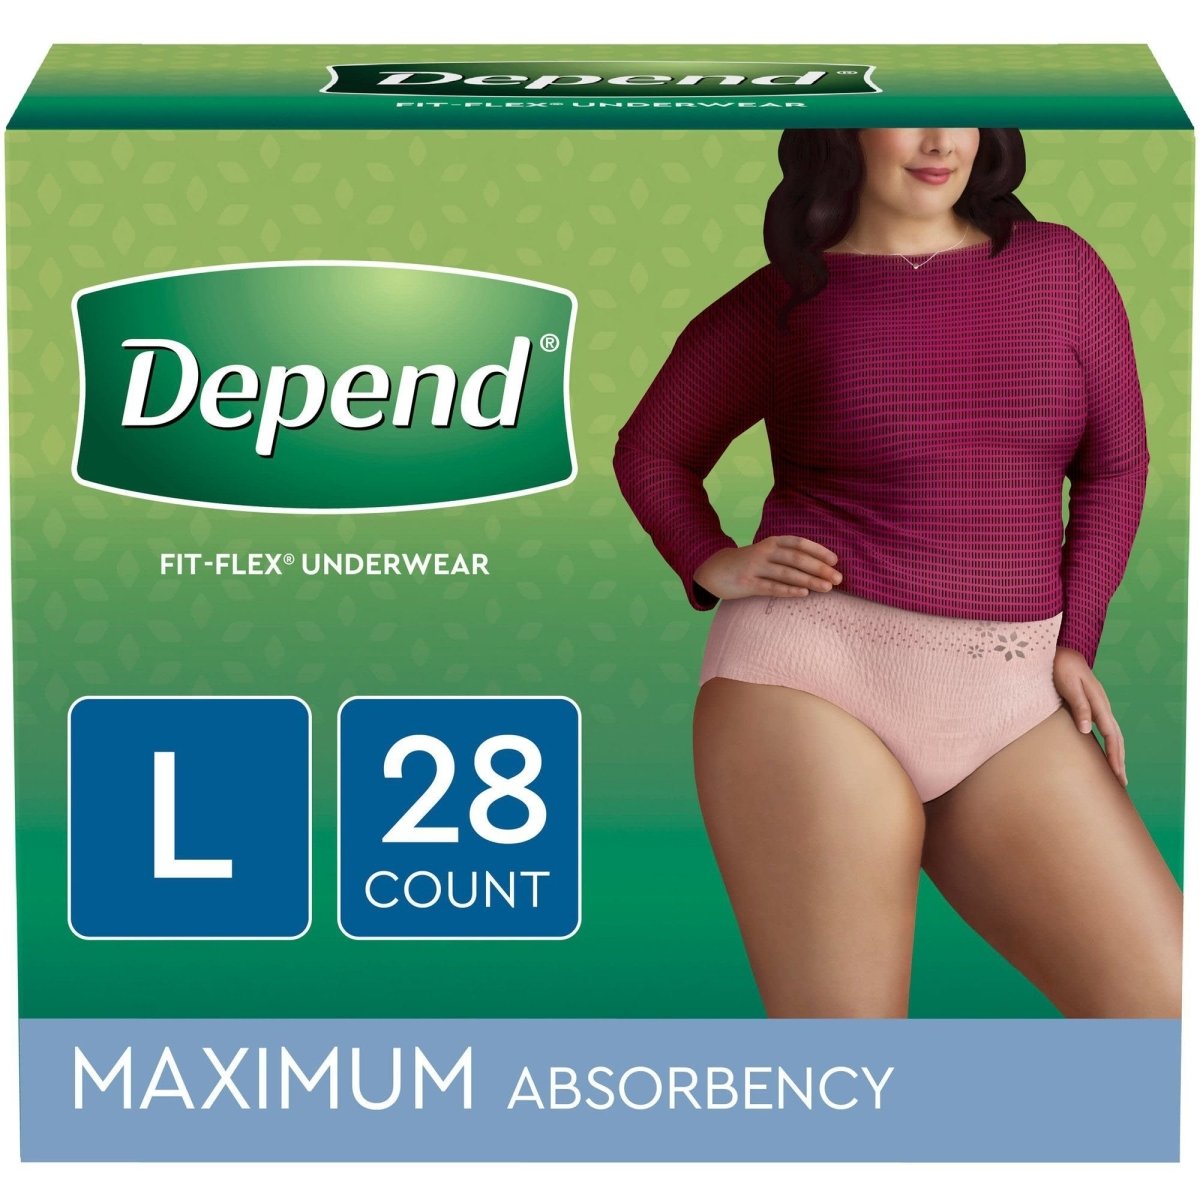 Why Every Woman is Talking About Depend FIT-FLEX Absorbent Underwear! - Cart Health